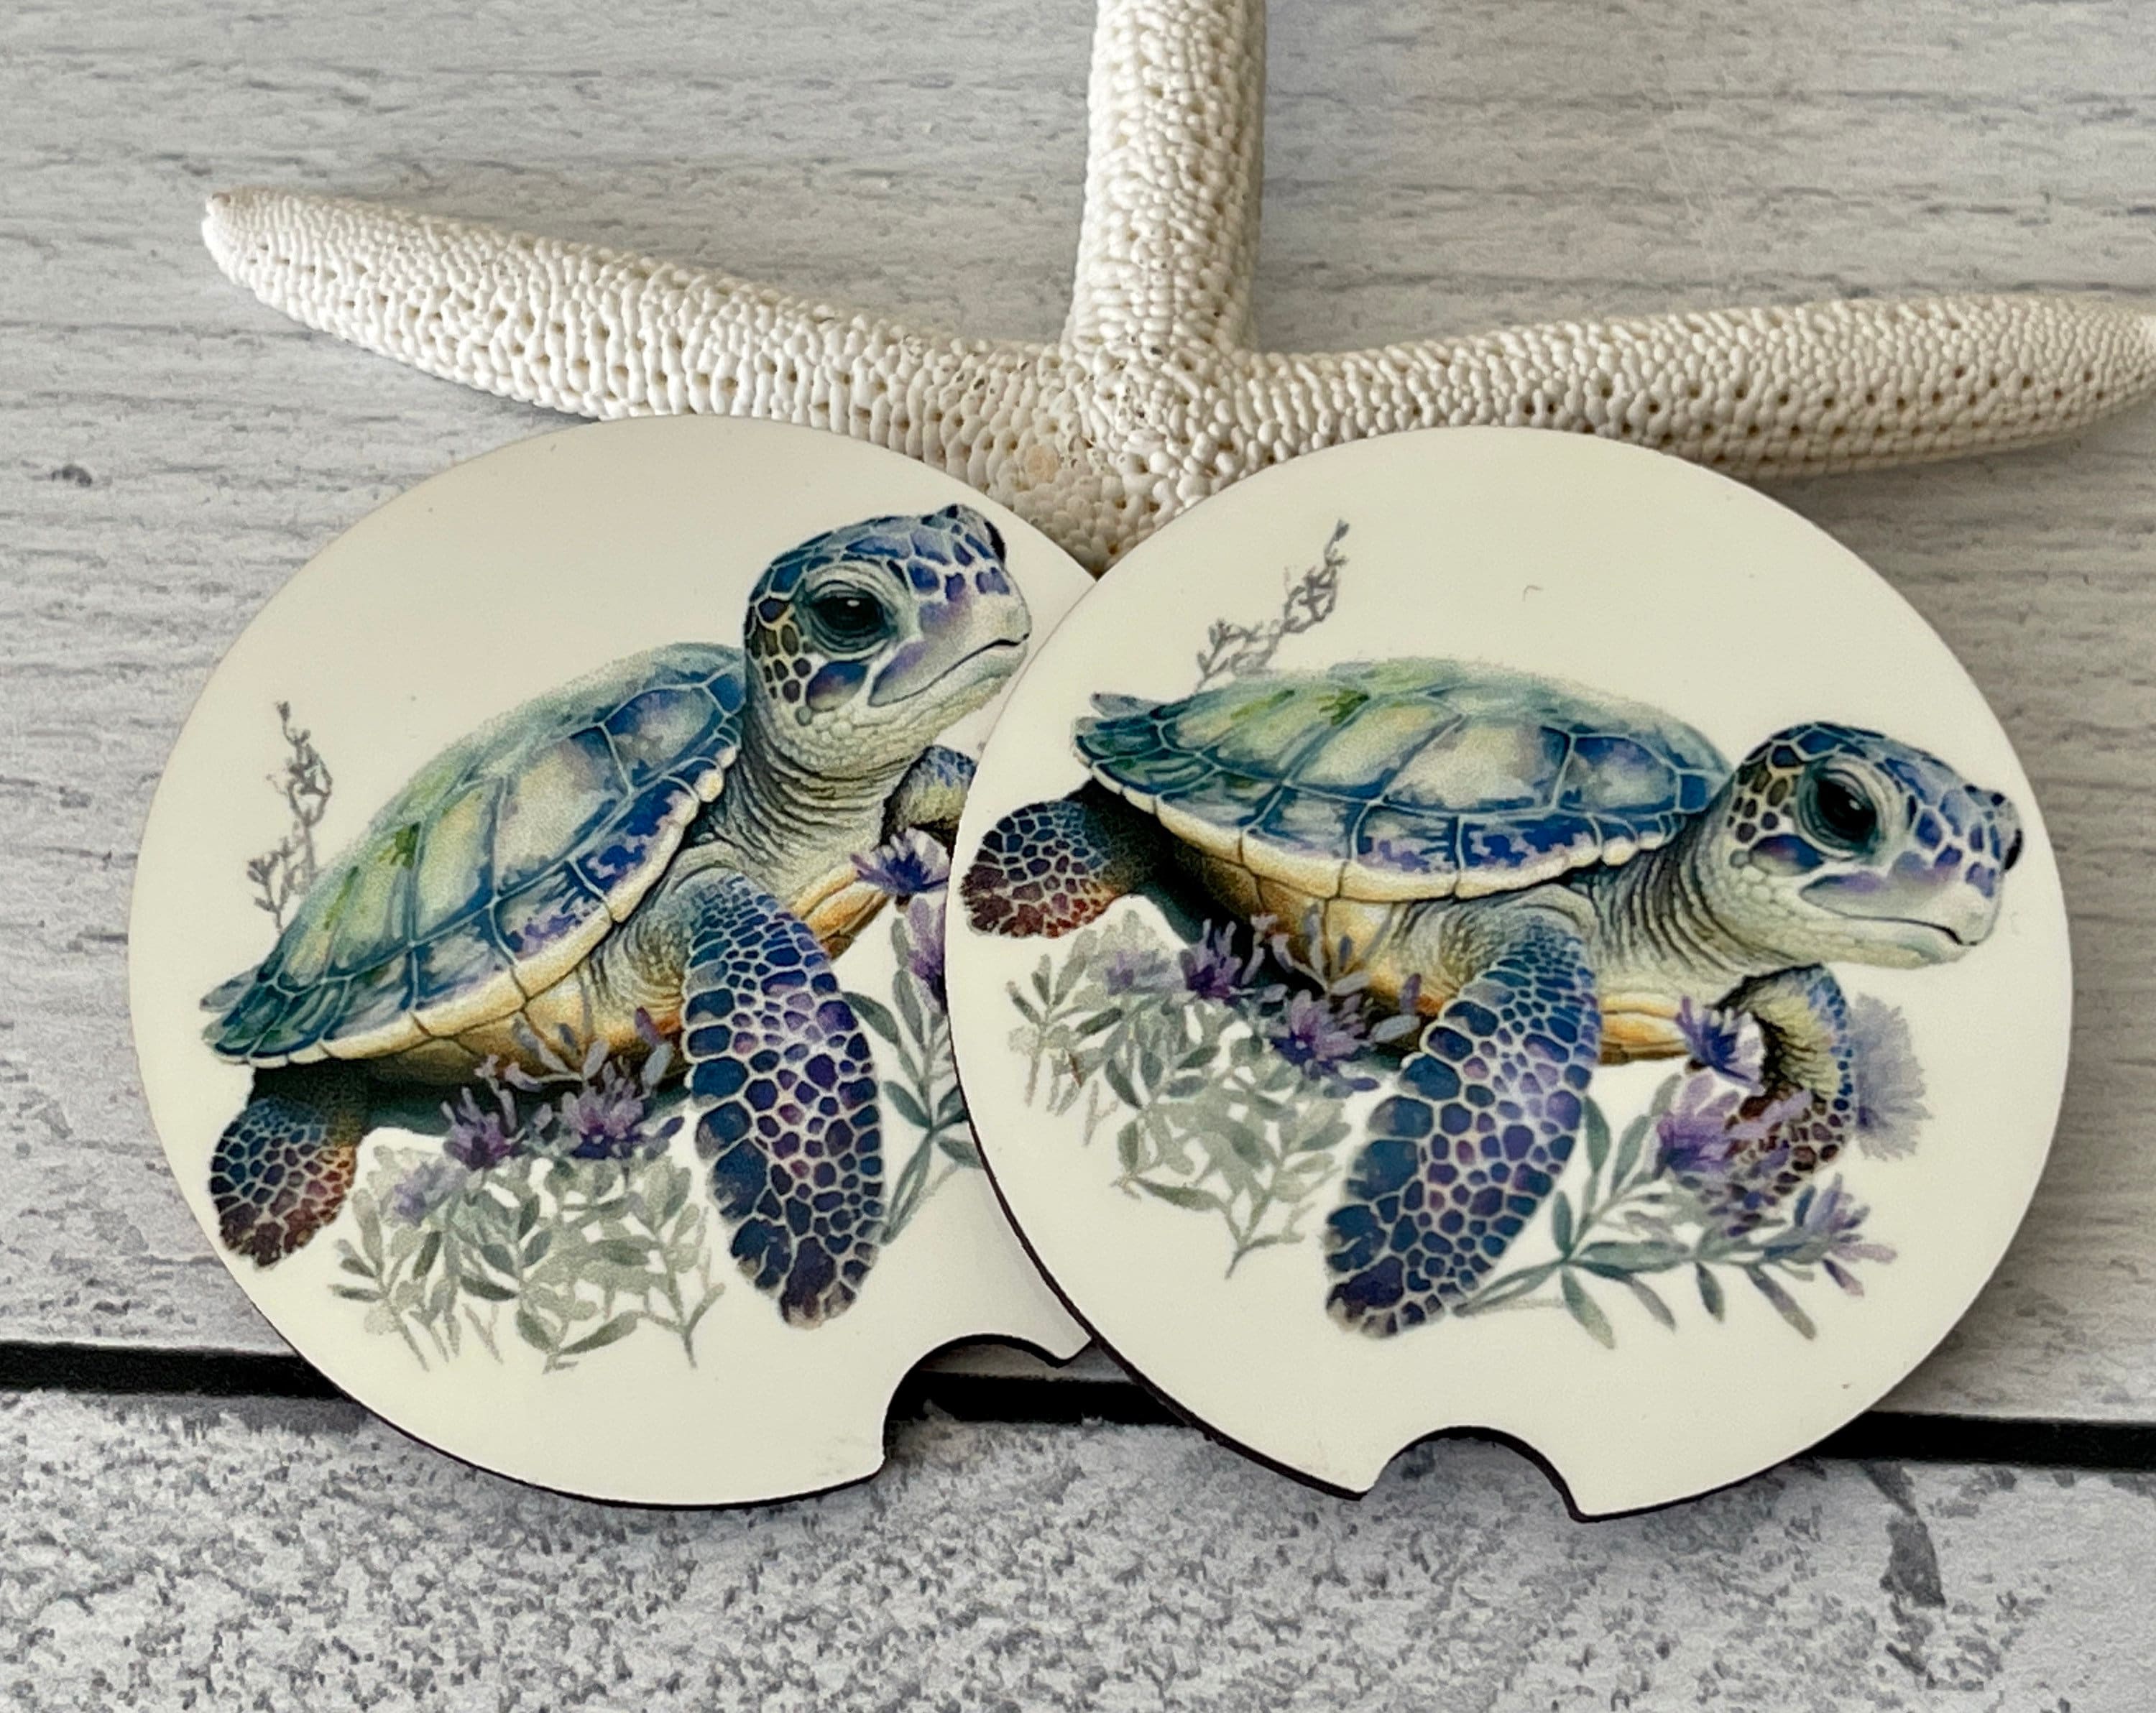 Sea Turtle Hanging Ornament Things For Car Vehicle Ornaments